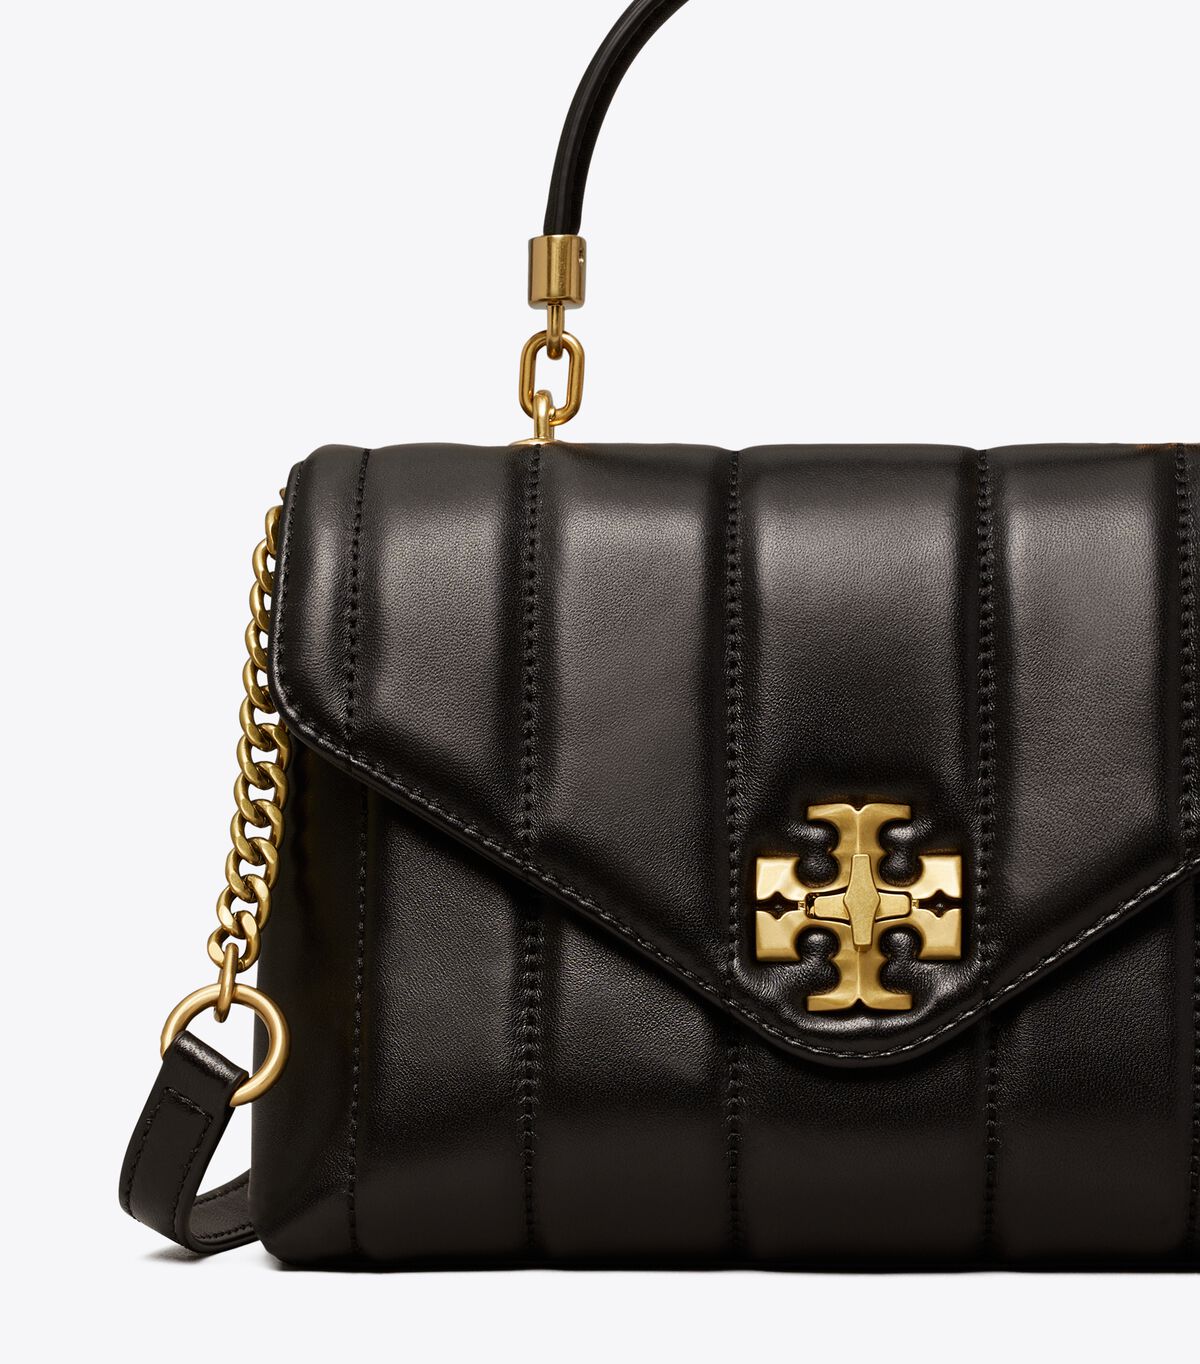 Buy Tory Burch Small Kira Quilted Satchel Bag For Women - Black Rolled Gold in Pakistan